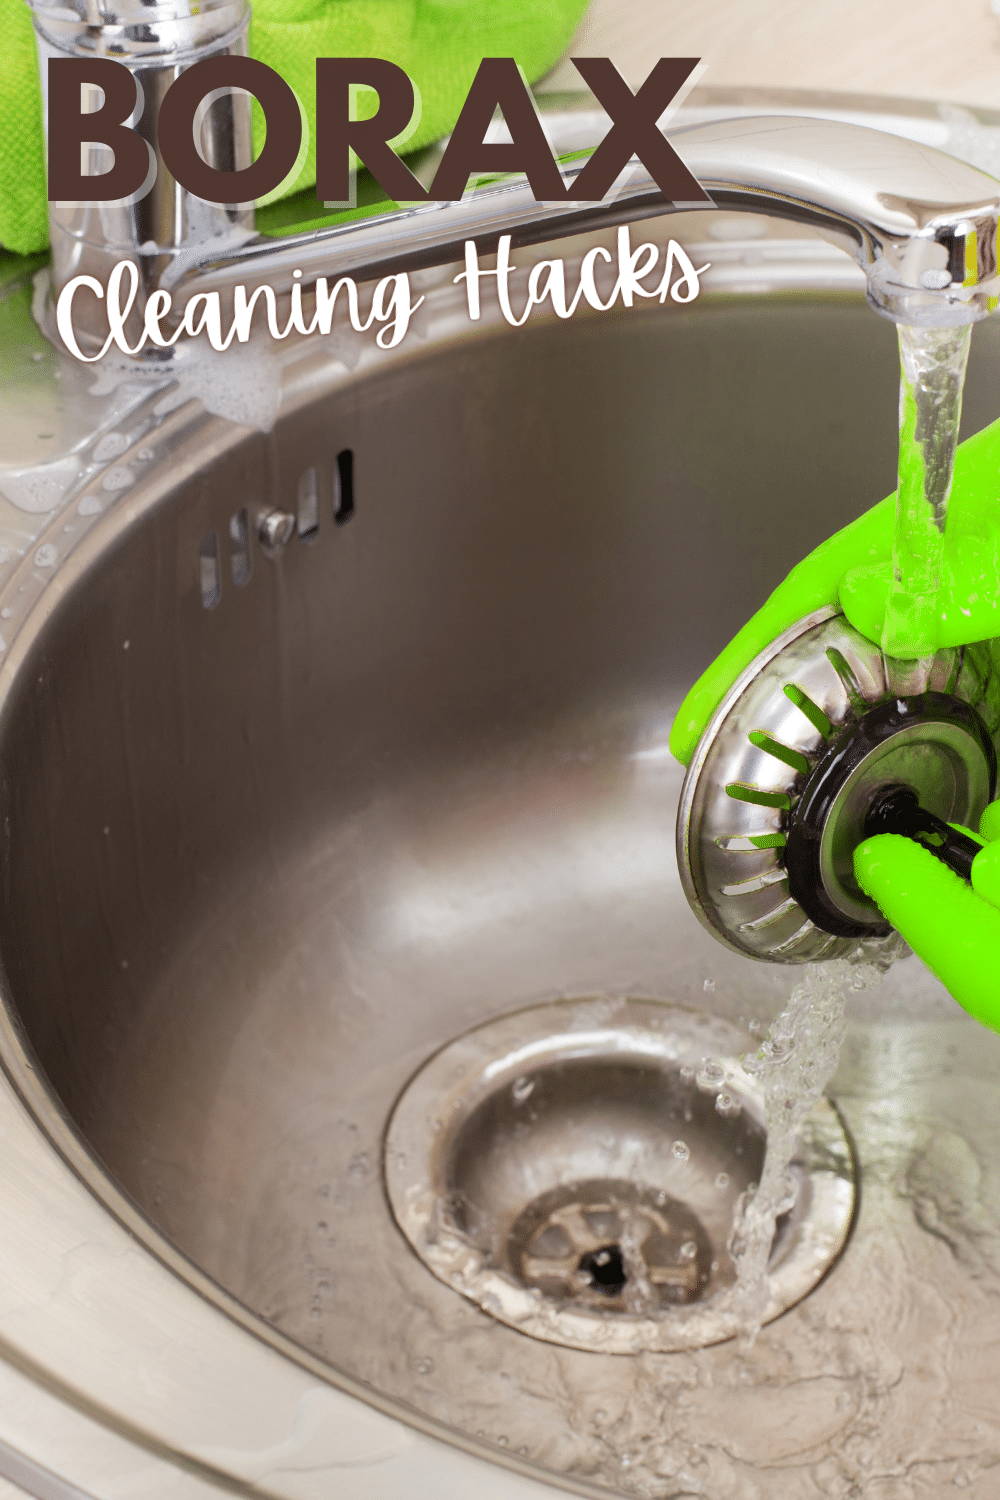 Save time and money by using this common laundry room product to clean all sorts of things besides clothes! #cleaningtips #borax #lifehacks via @wondermomwannab